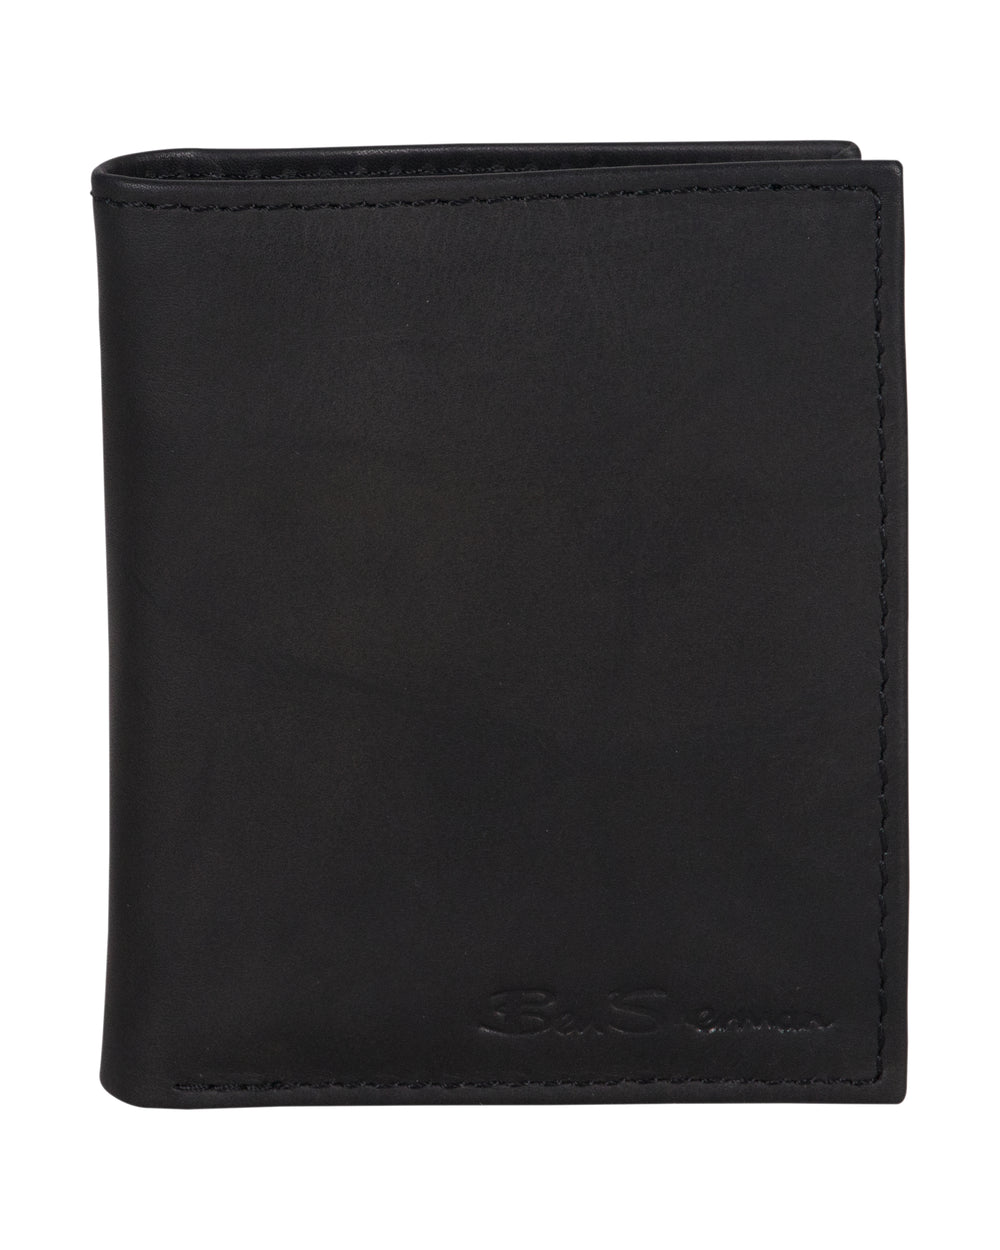 Manchester Marble Crunch Leather Bifold Wallet with Pull Tab - Black